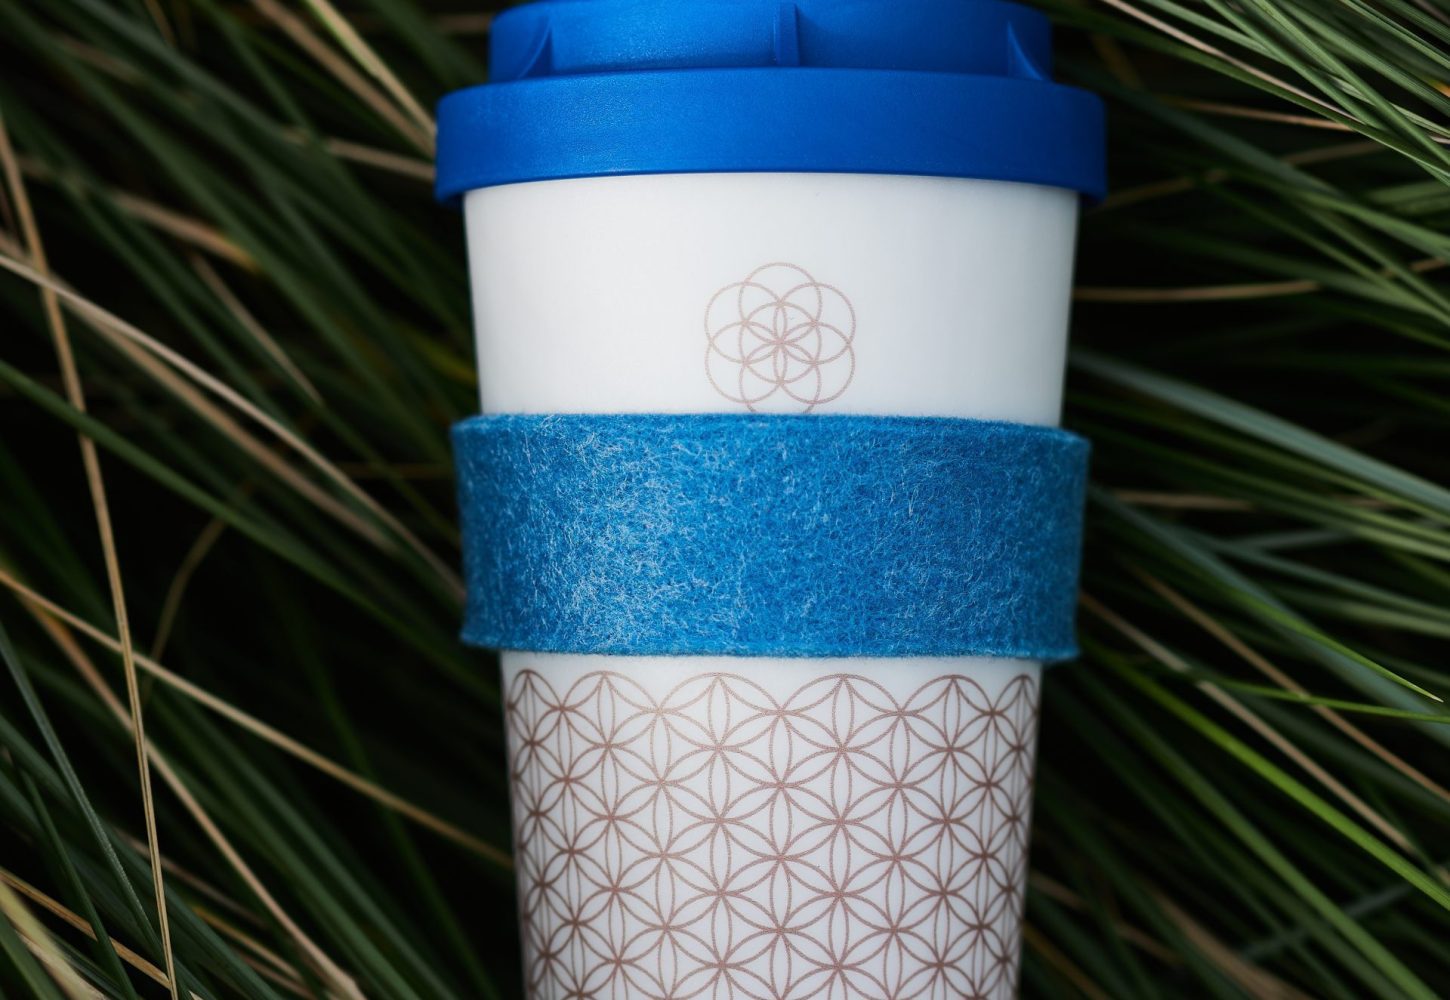 Sustainable plastic - reusable cups to-go cups made from renewable raw materials